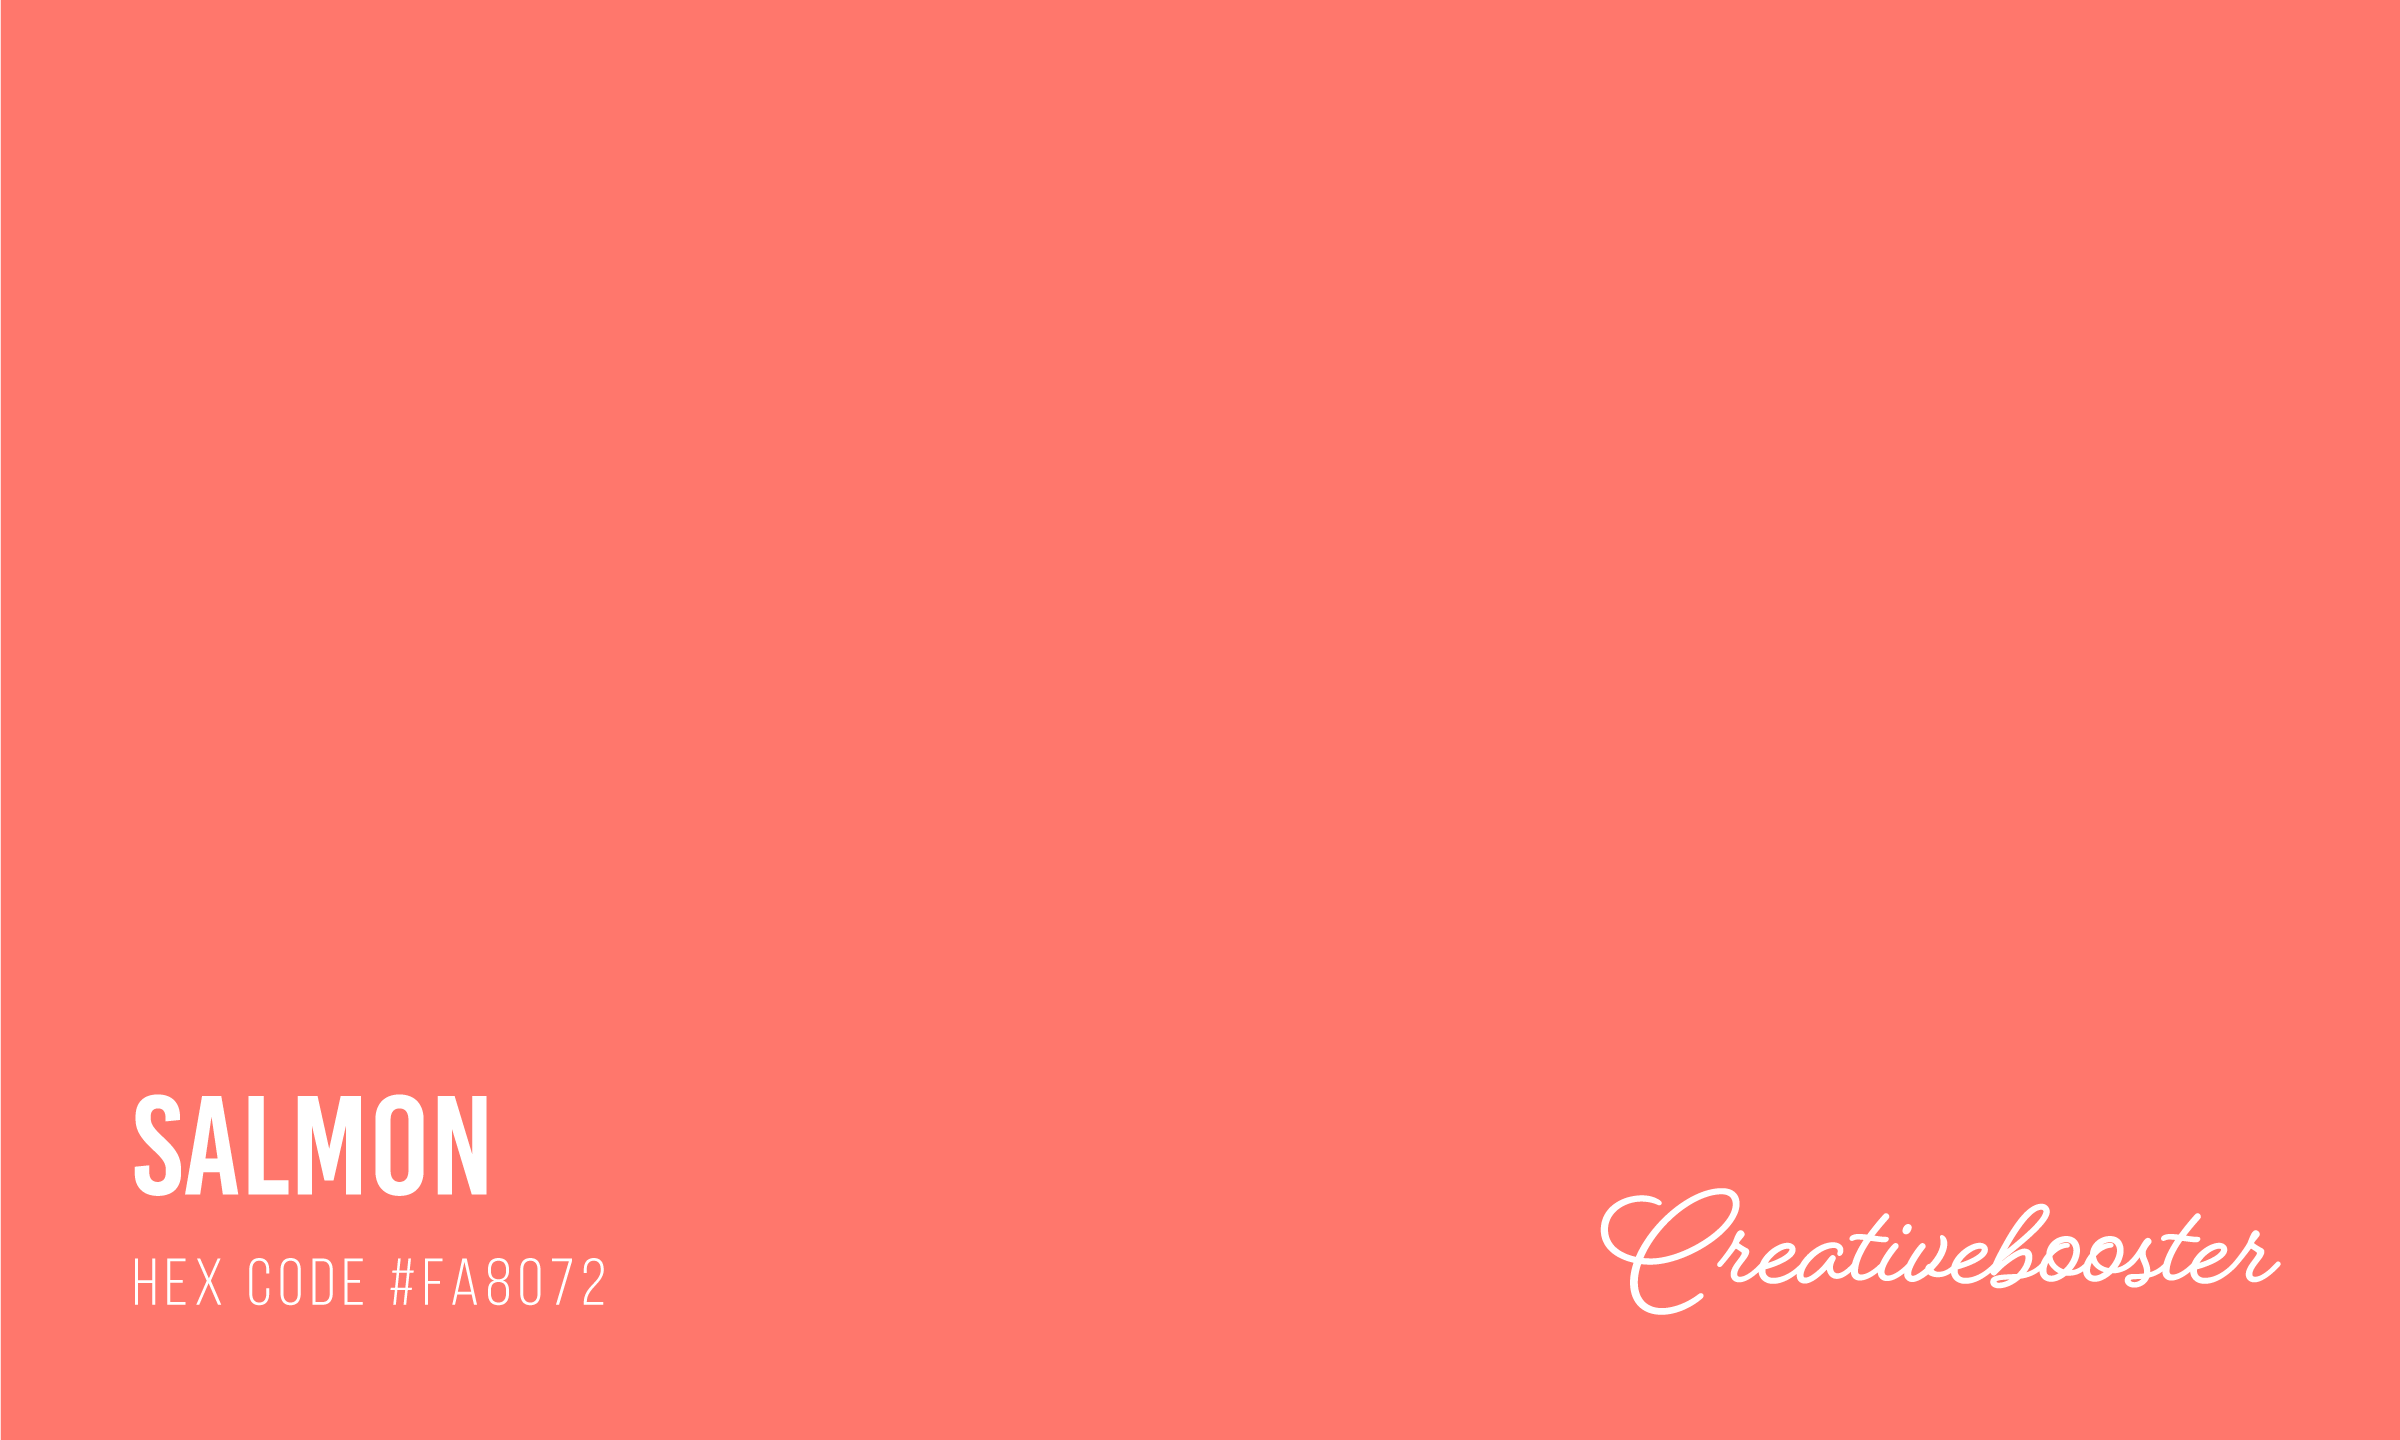 Color Palette With Five Shade Pale Rose Pink Pink Pink Salmon